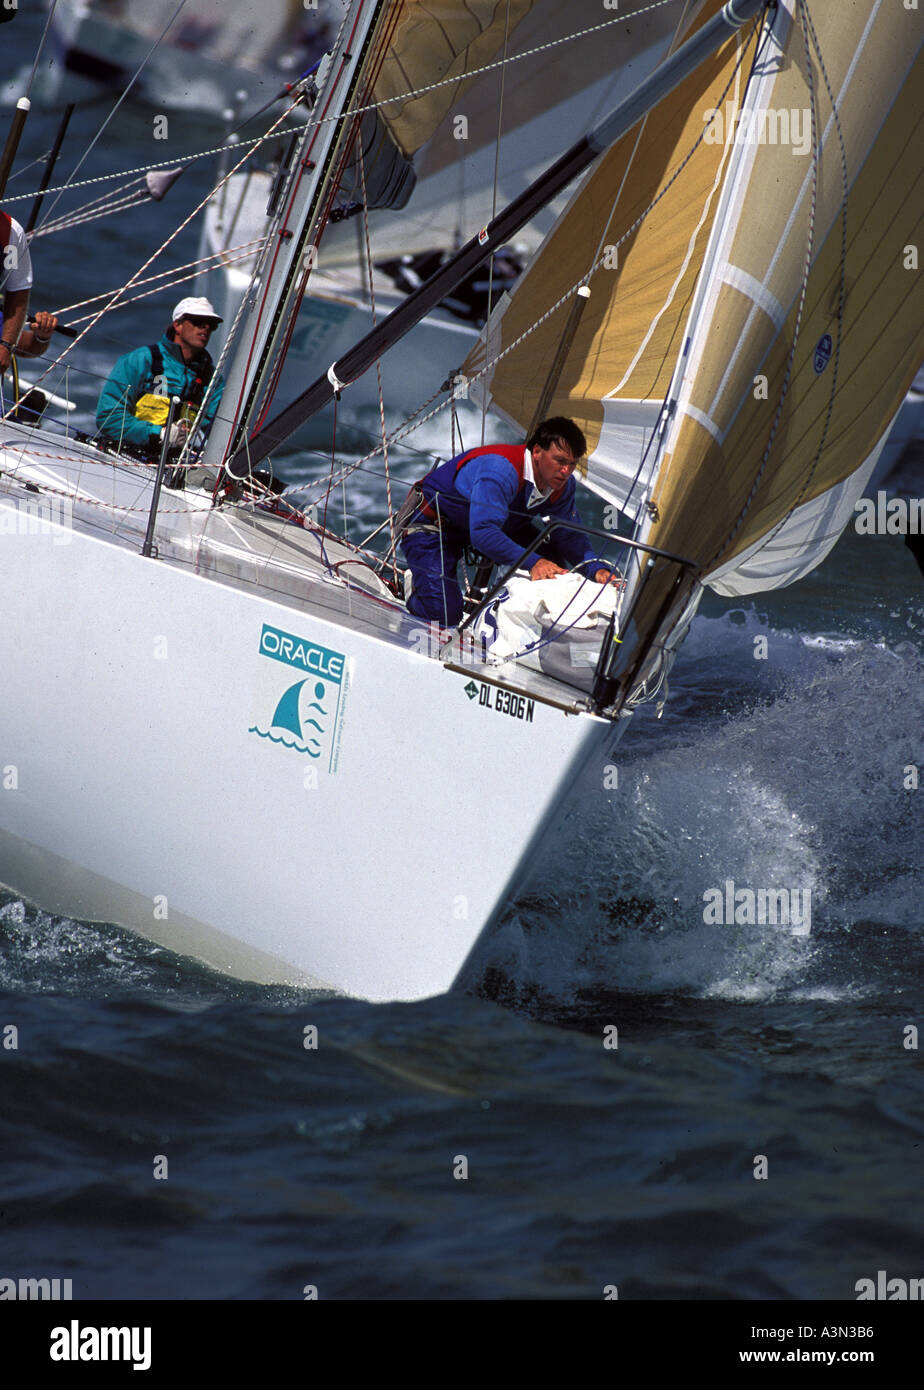 Bowman prepares sail on foredeck of a racing yacht Stock Photo - Alamy